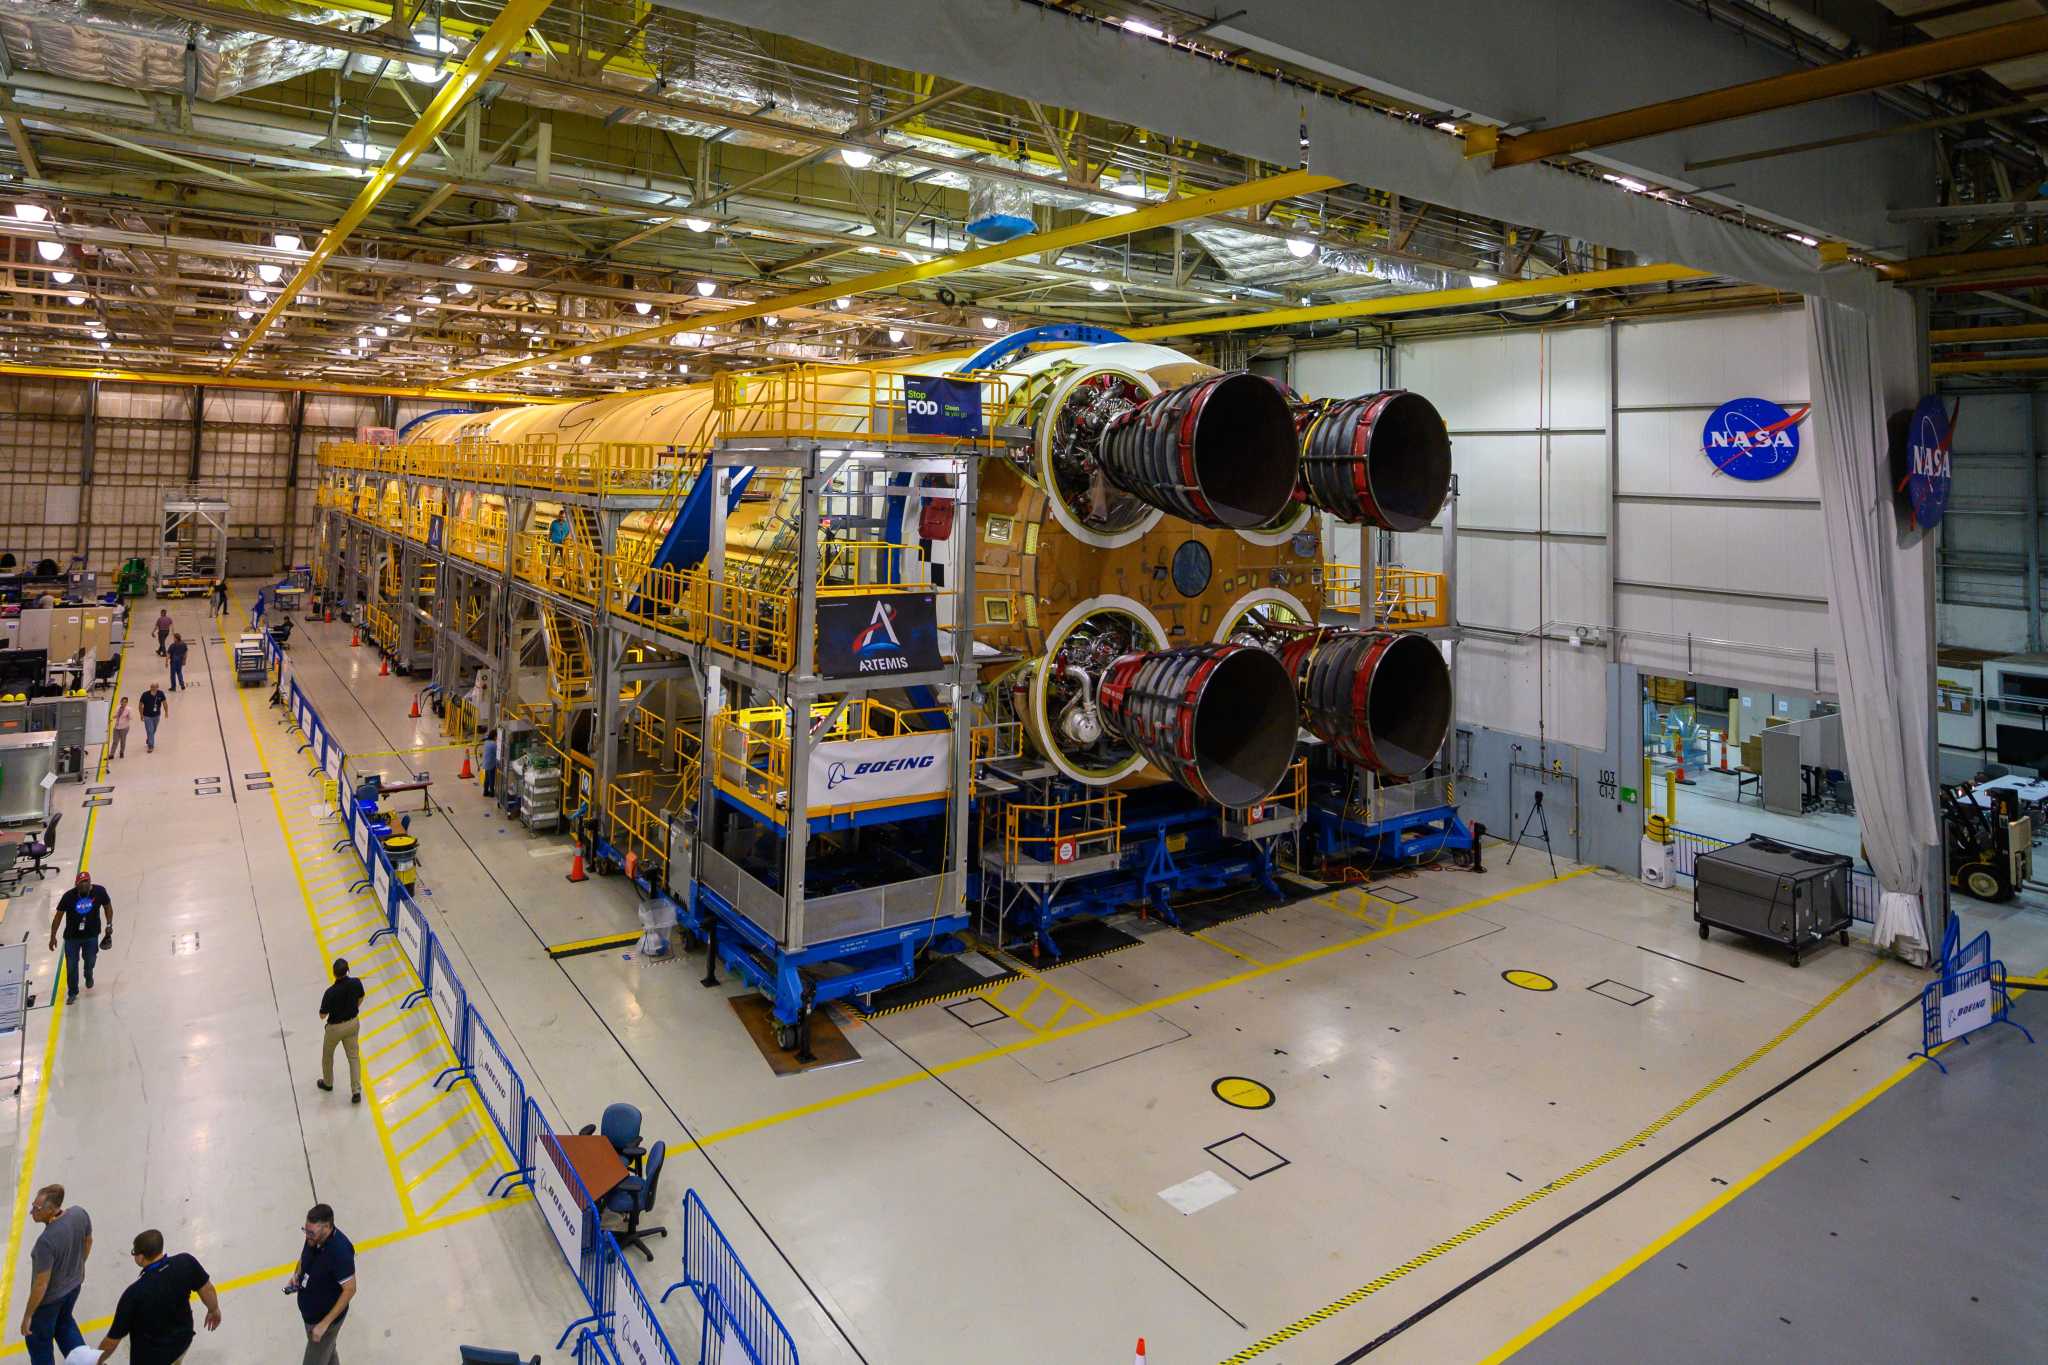 Engineers and technicians attached the last of four RS-25 engines that will provide the necessary thrust for the SLS rocket